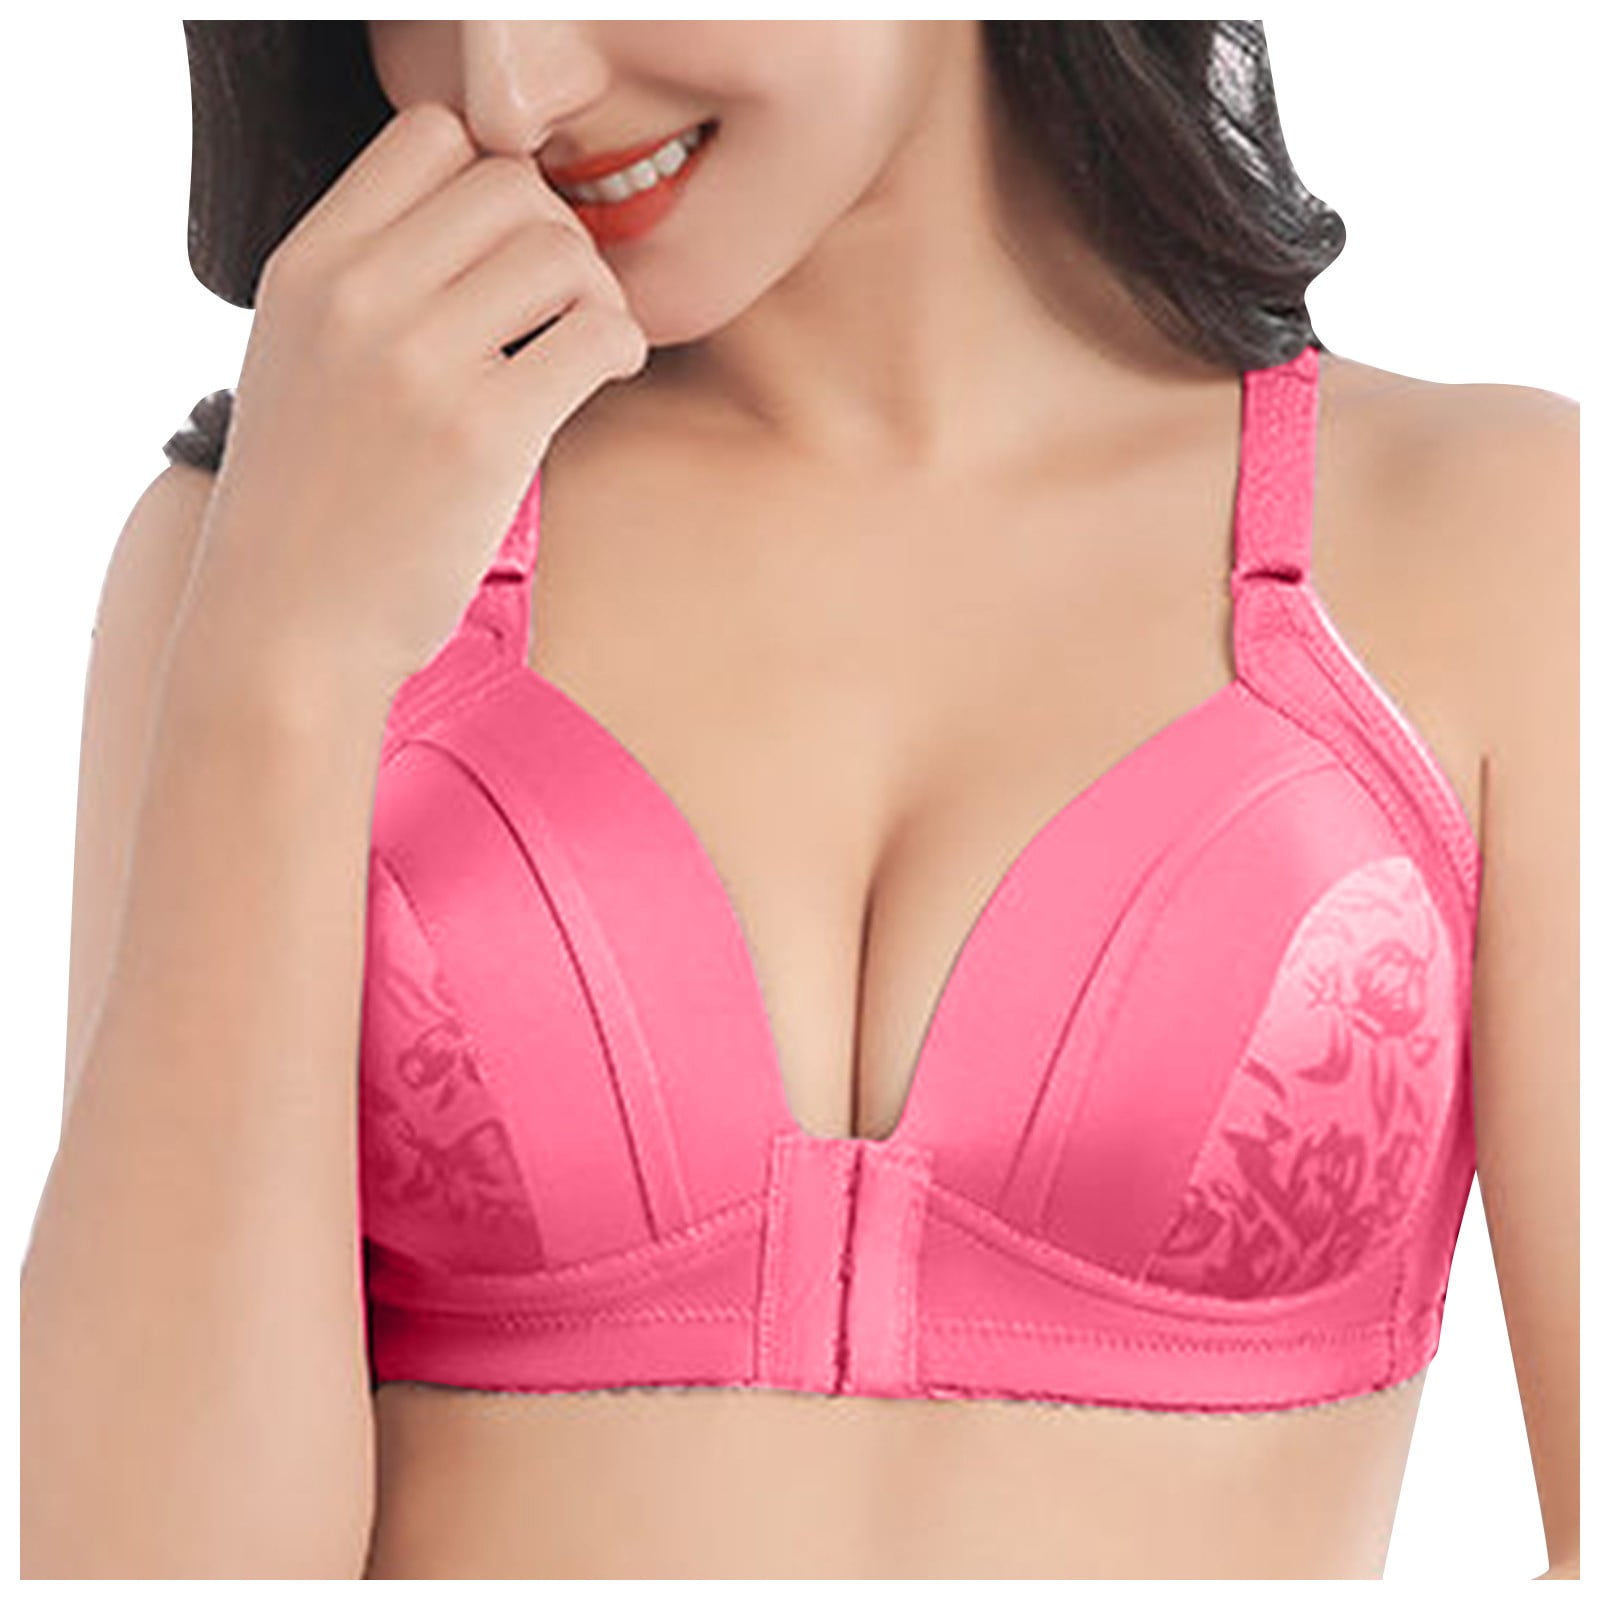 Women's Front Open Bra Padded Underwired Extra Push-Up Bra Pink